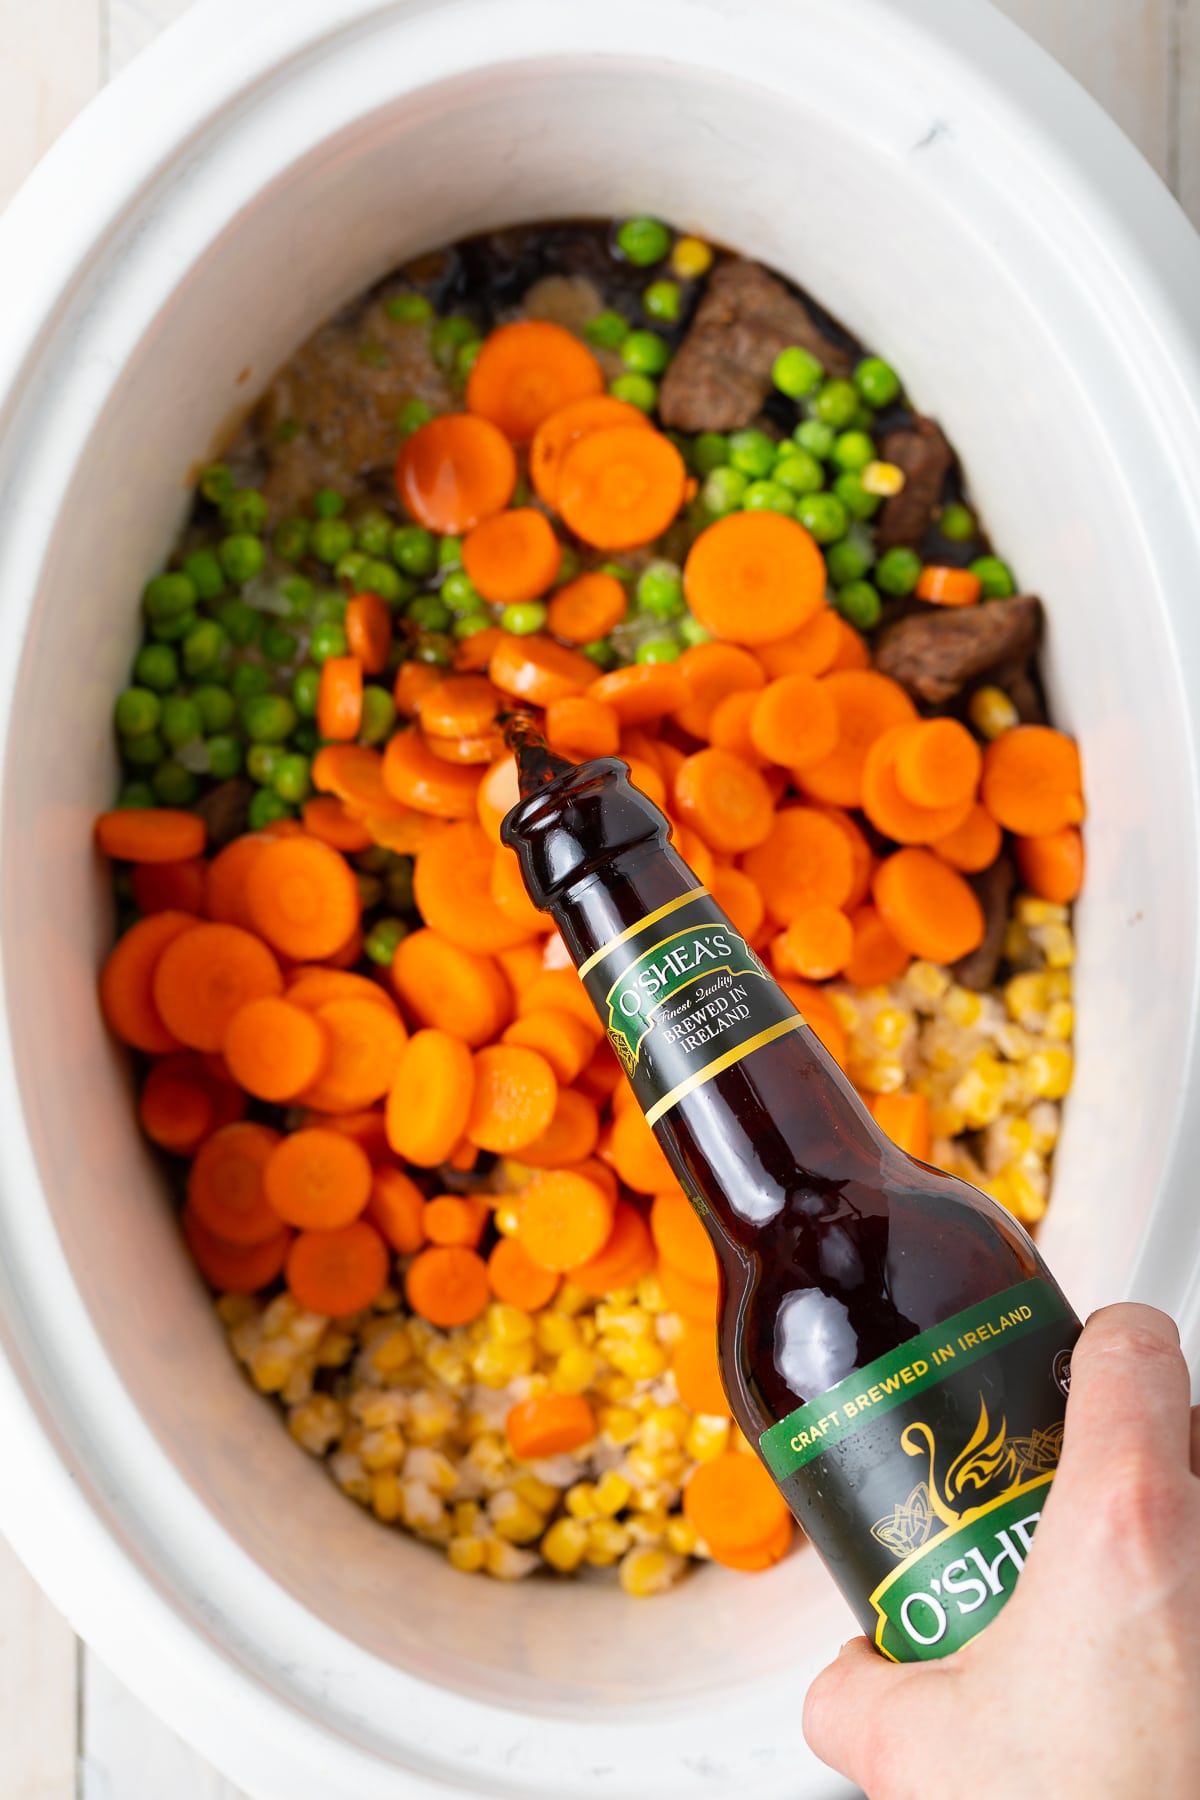 How To Make Slow Cooker Shepherds Pie Recipe with Guinness #ASpicyPerspective #irish #slowcooker #crockpot #march #saintpatricksday #stpaddysday